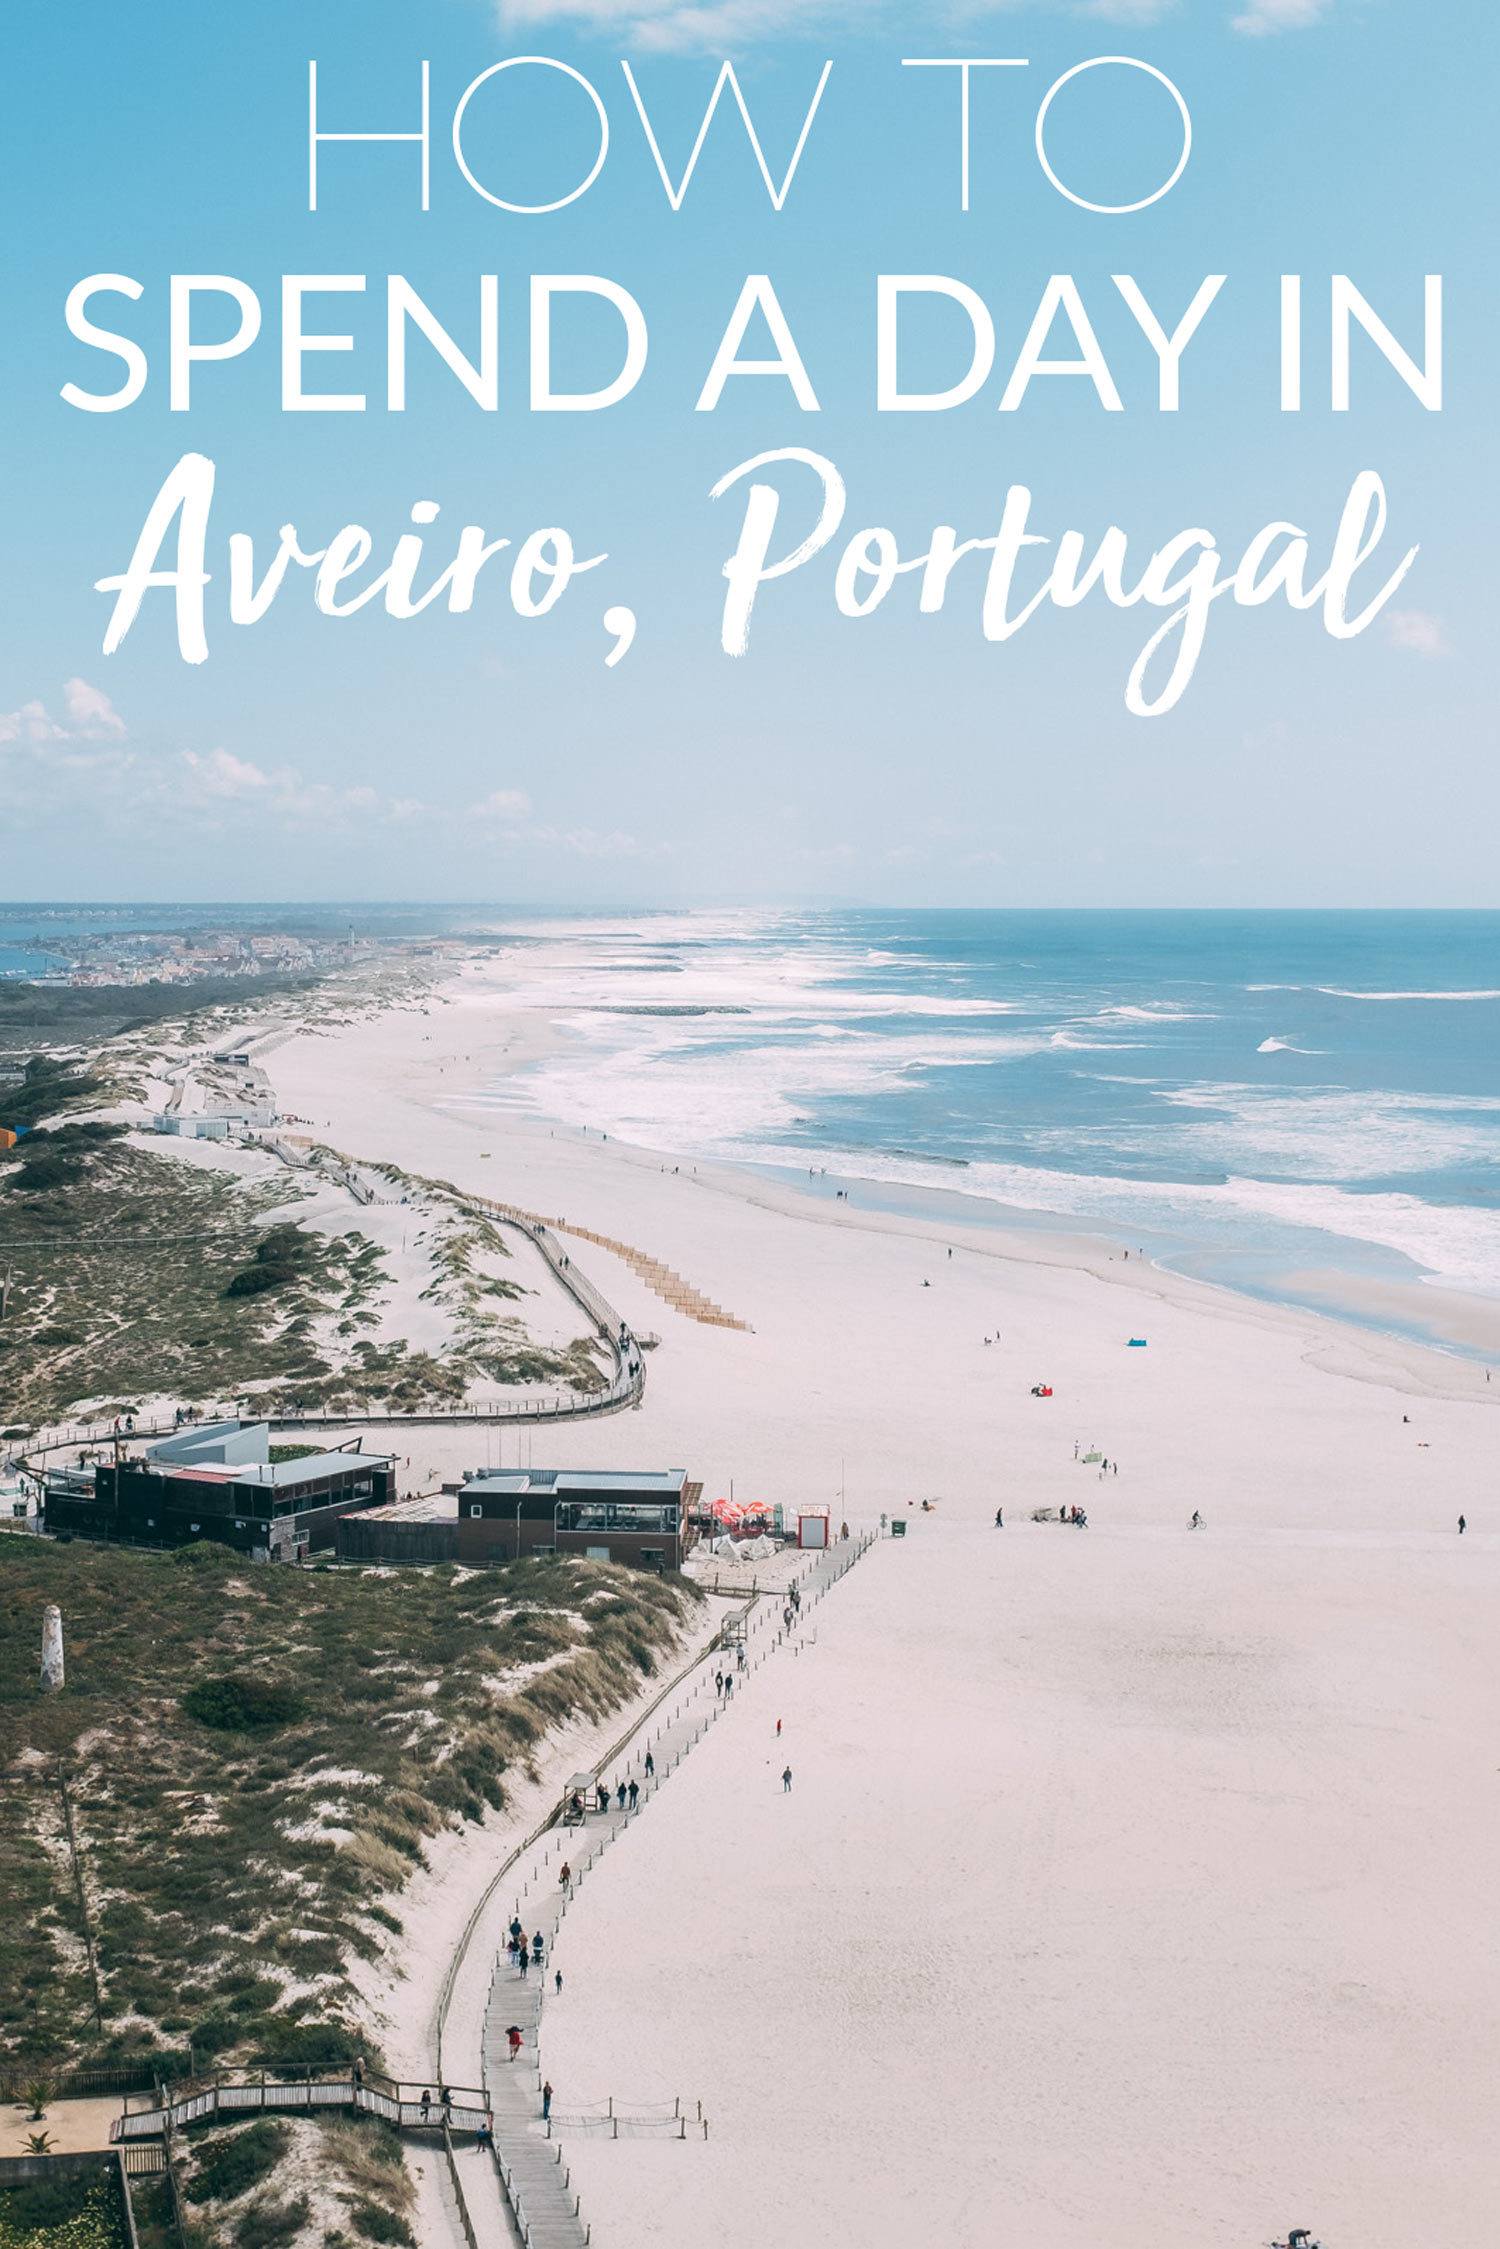 How to Spend a Day in Aveiro Portugal